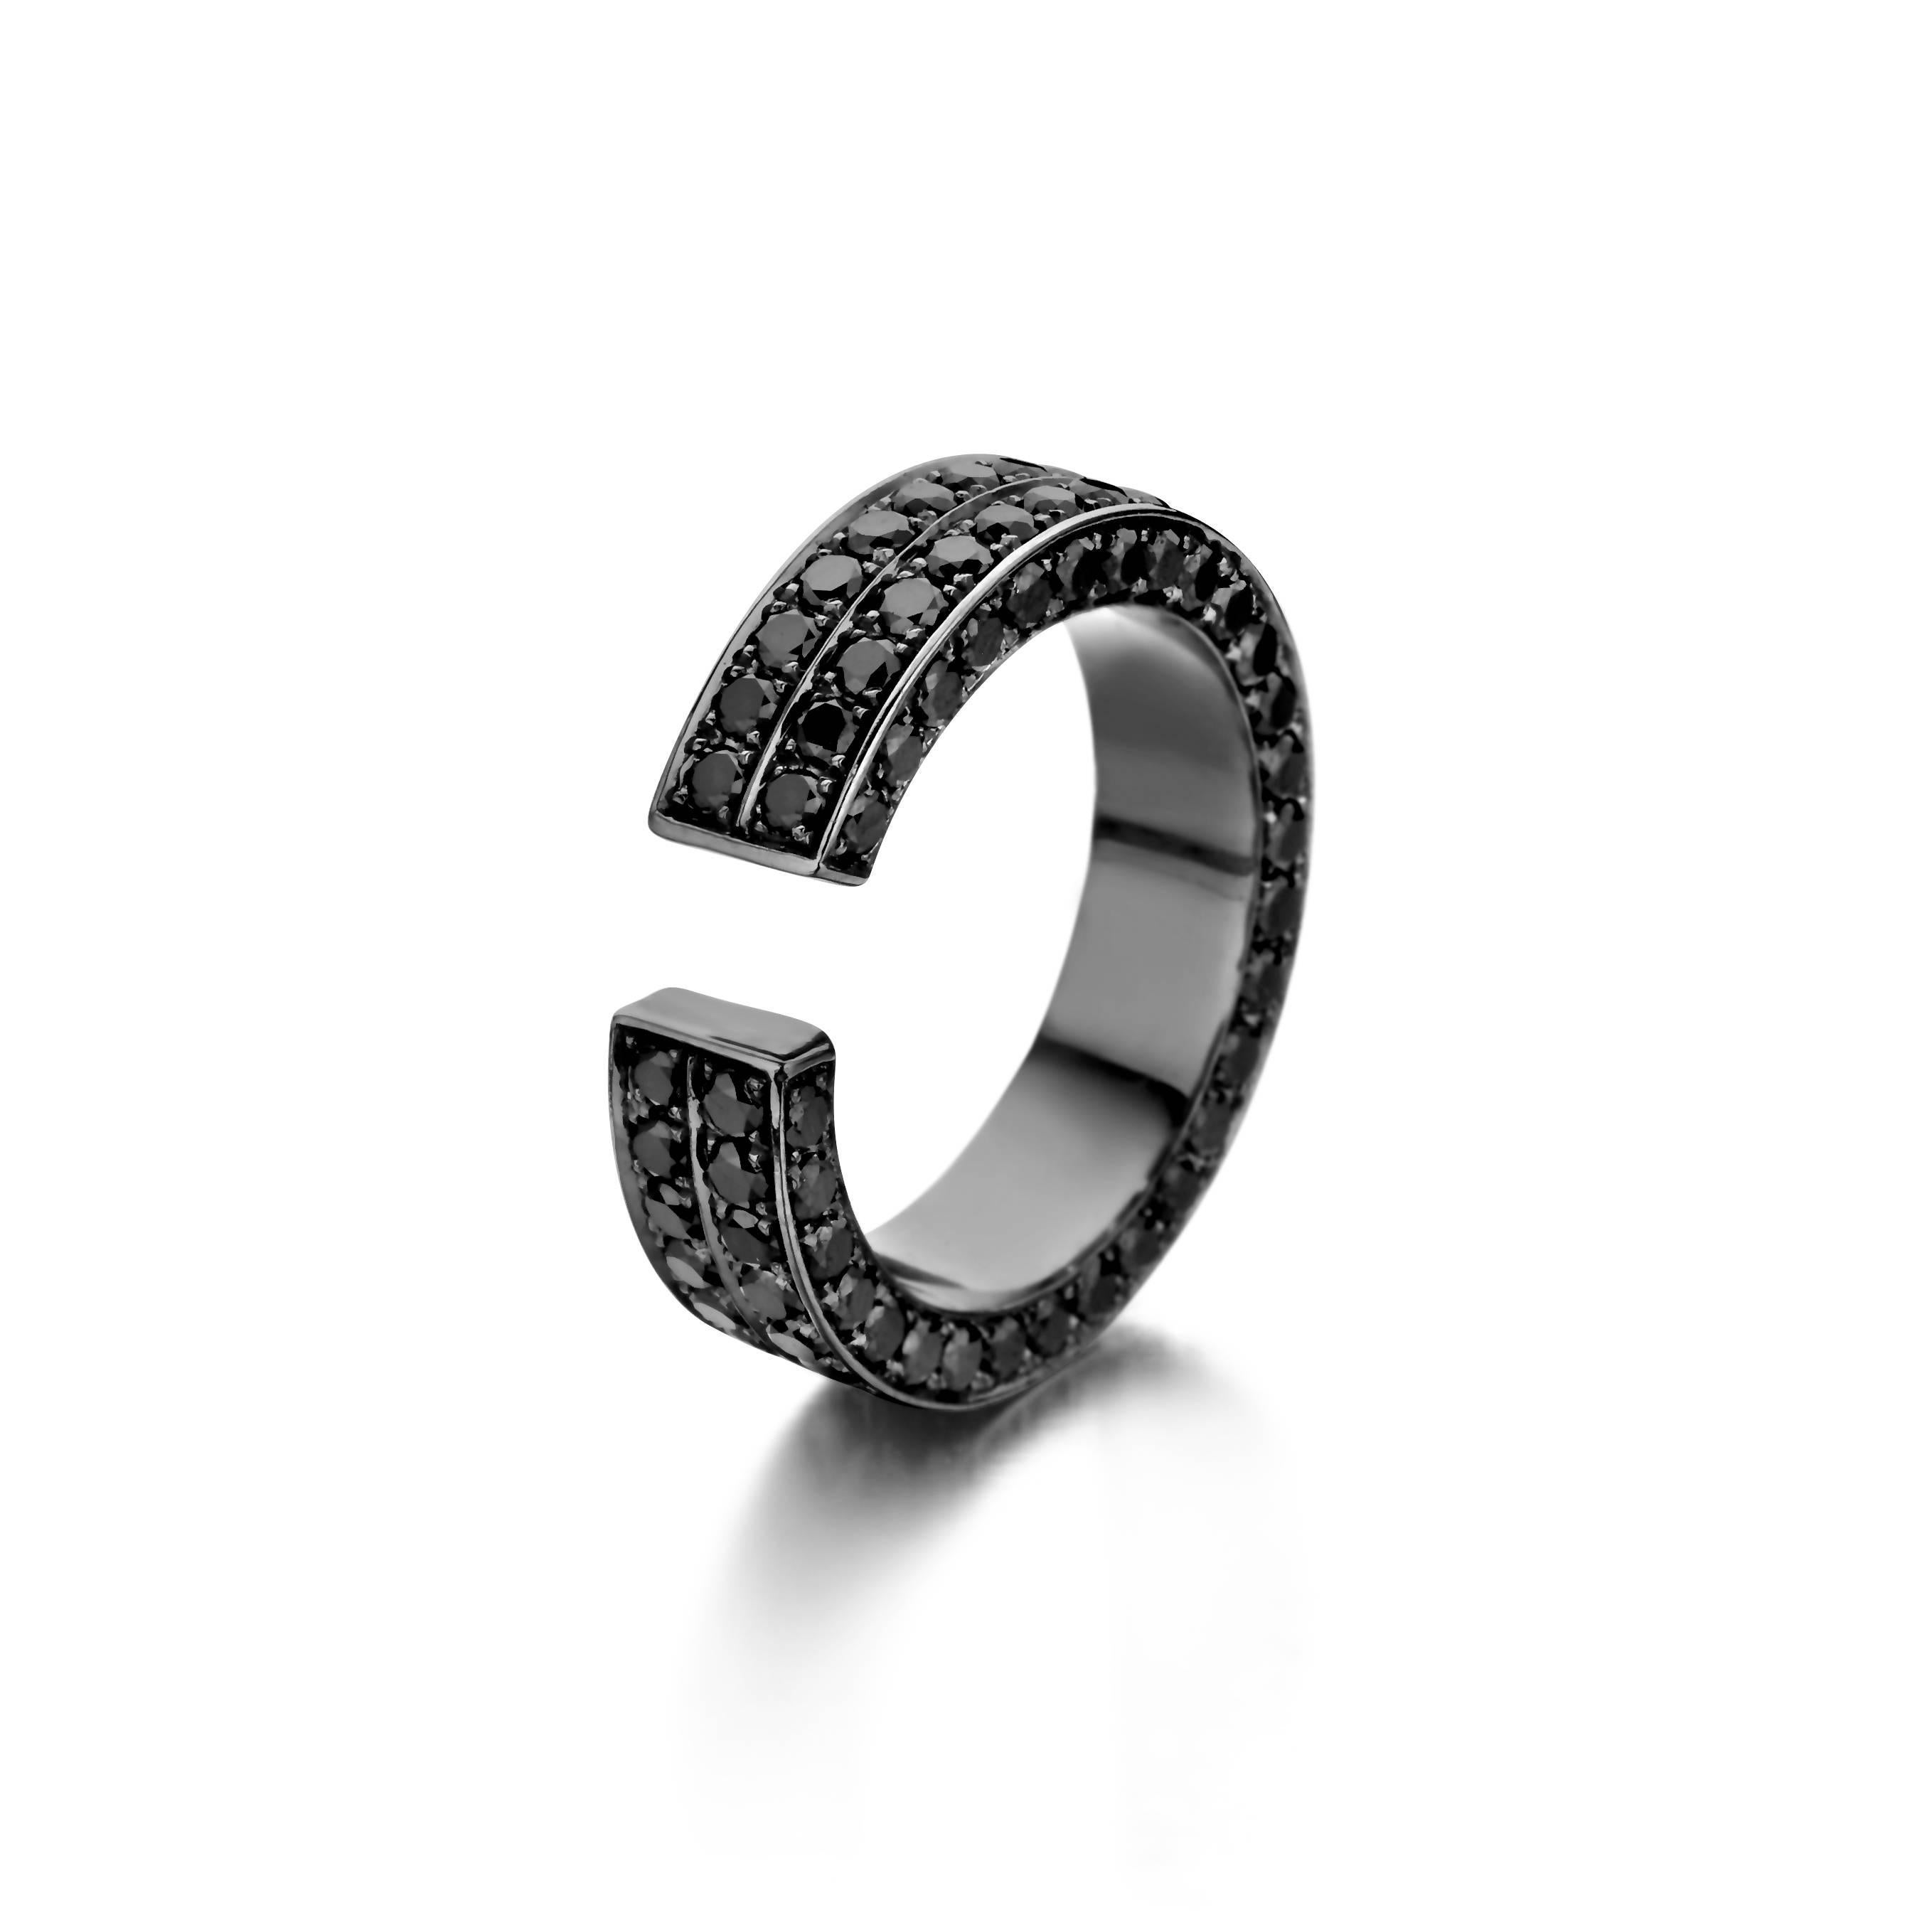 The BRUTE 18-karat gold ring has the appearance of two styles stacked together. Expertly handset with black diamonds, this piece is sure to make a refined statement. Wear yours solo.

Black, Natural Diamond 
Total Carat Weight: 2.5ct 

Certified by